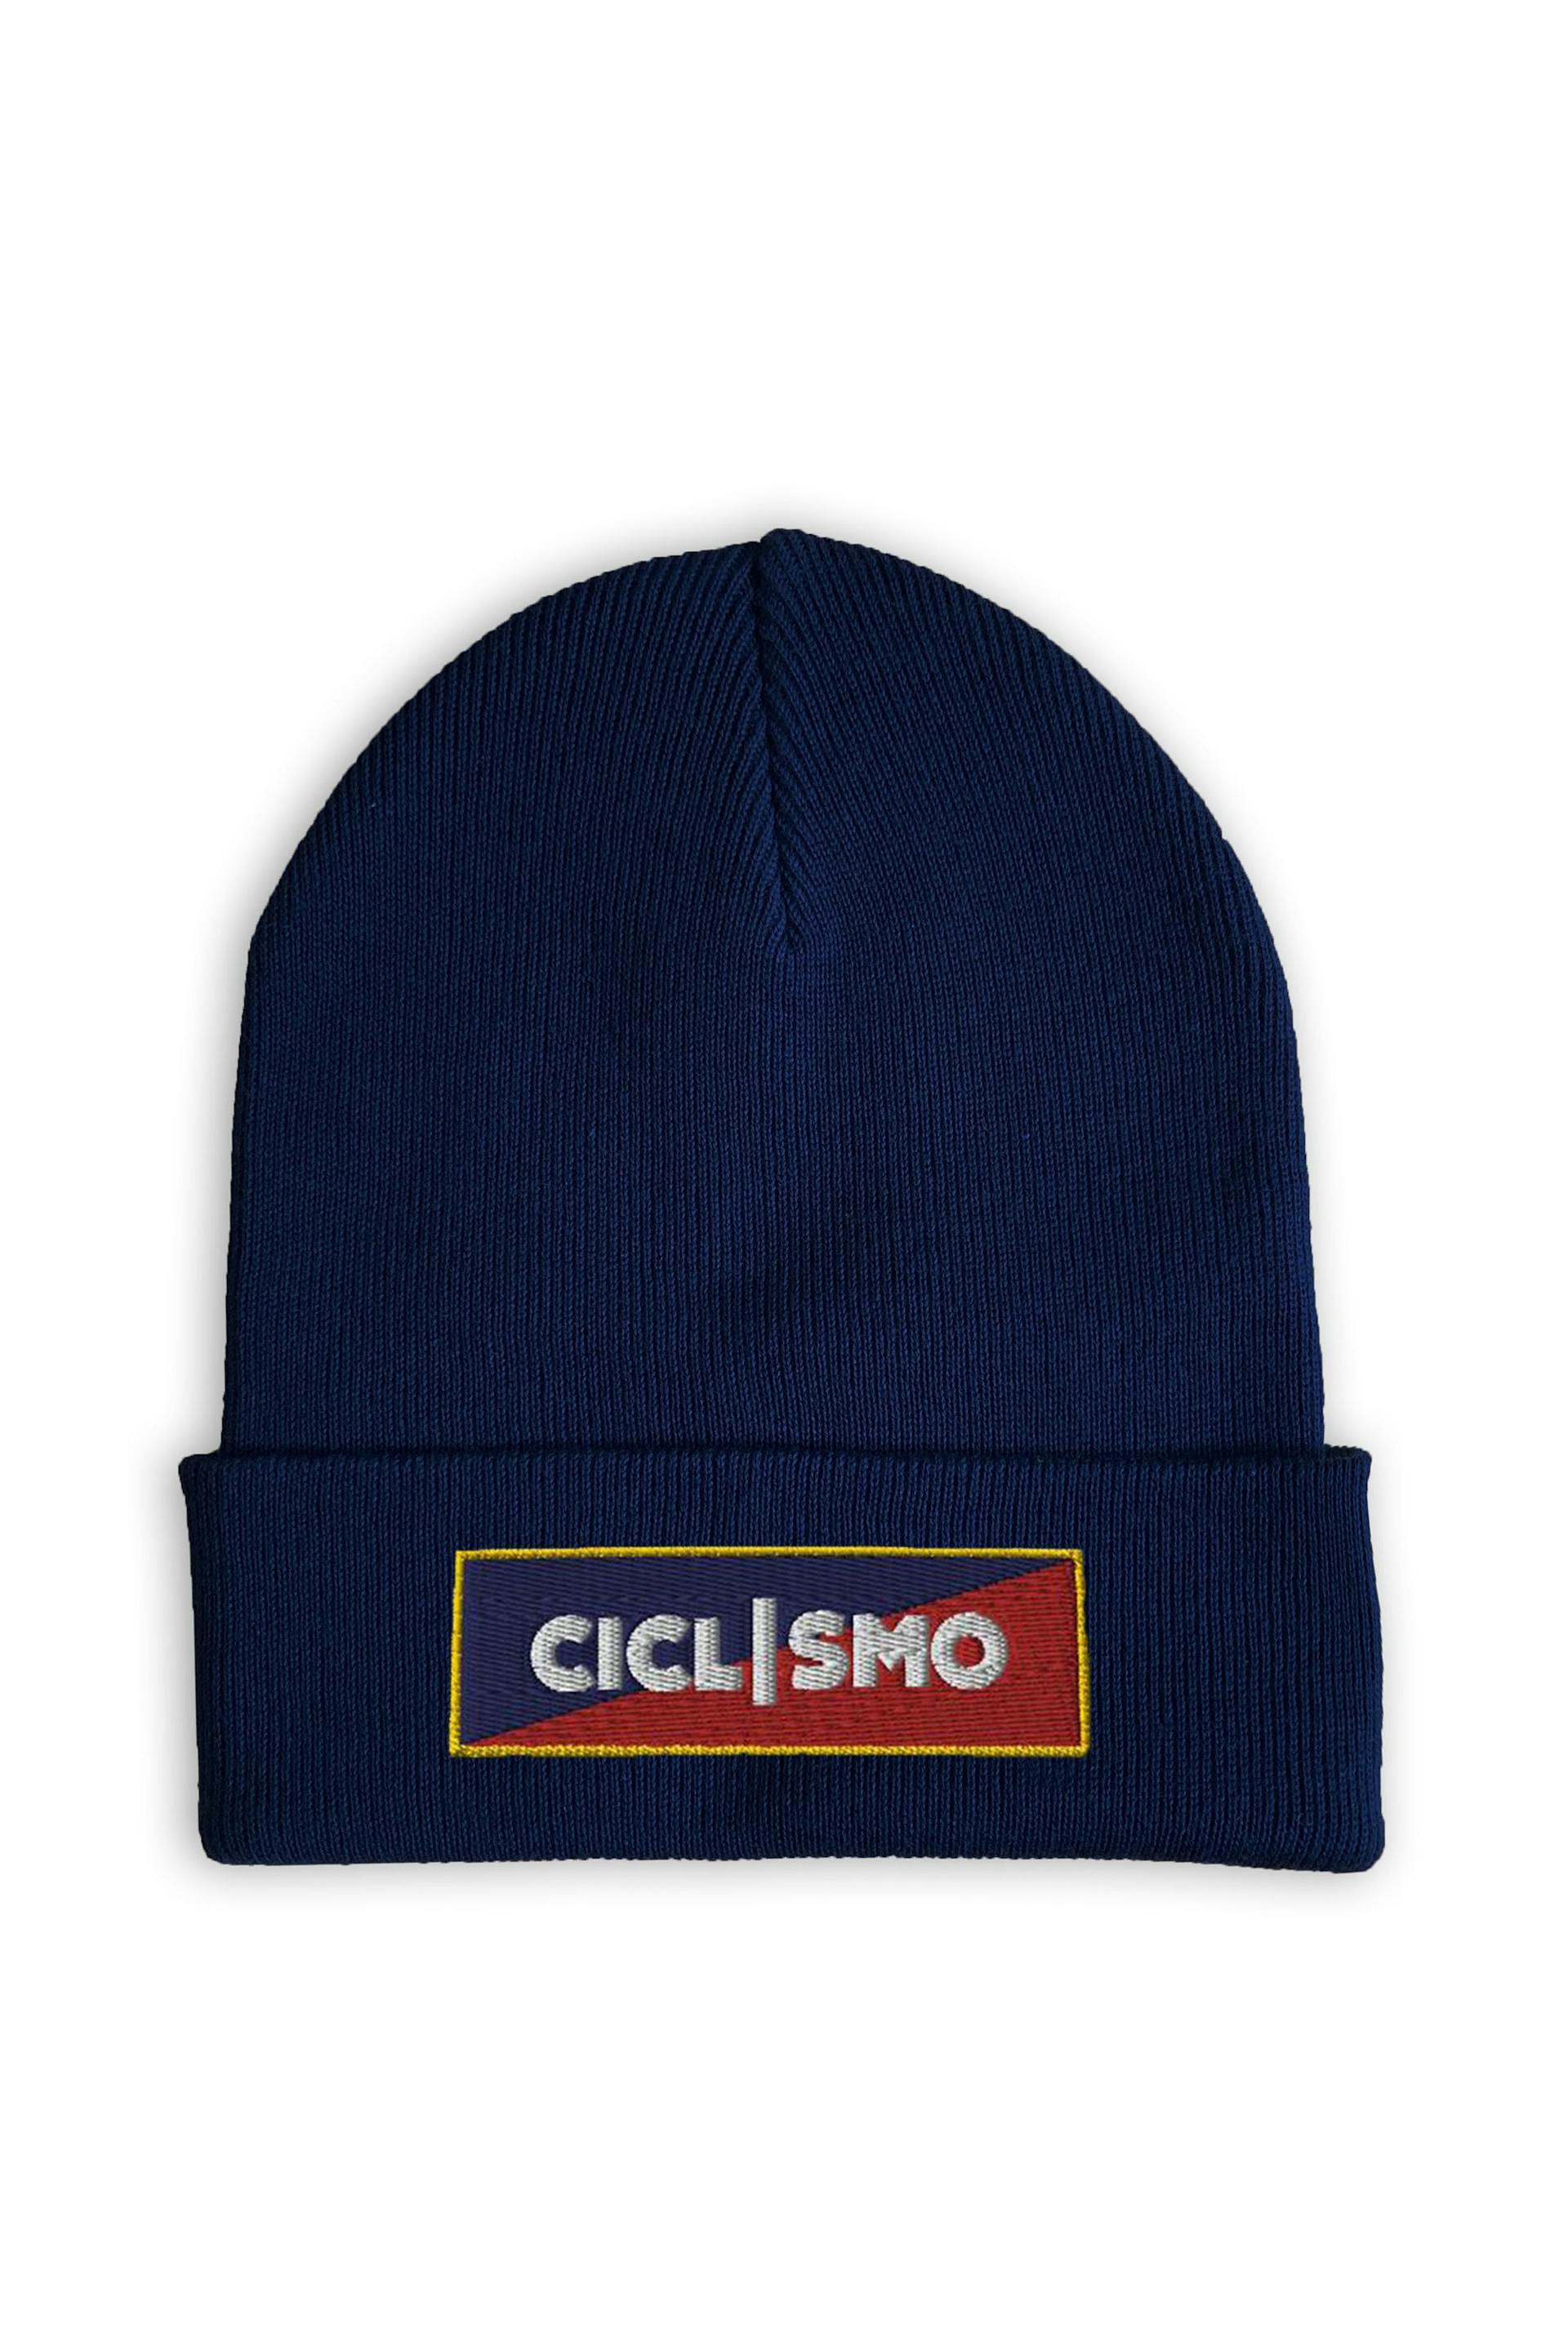 Ciclismo Beanie Hat Navy